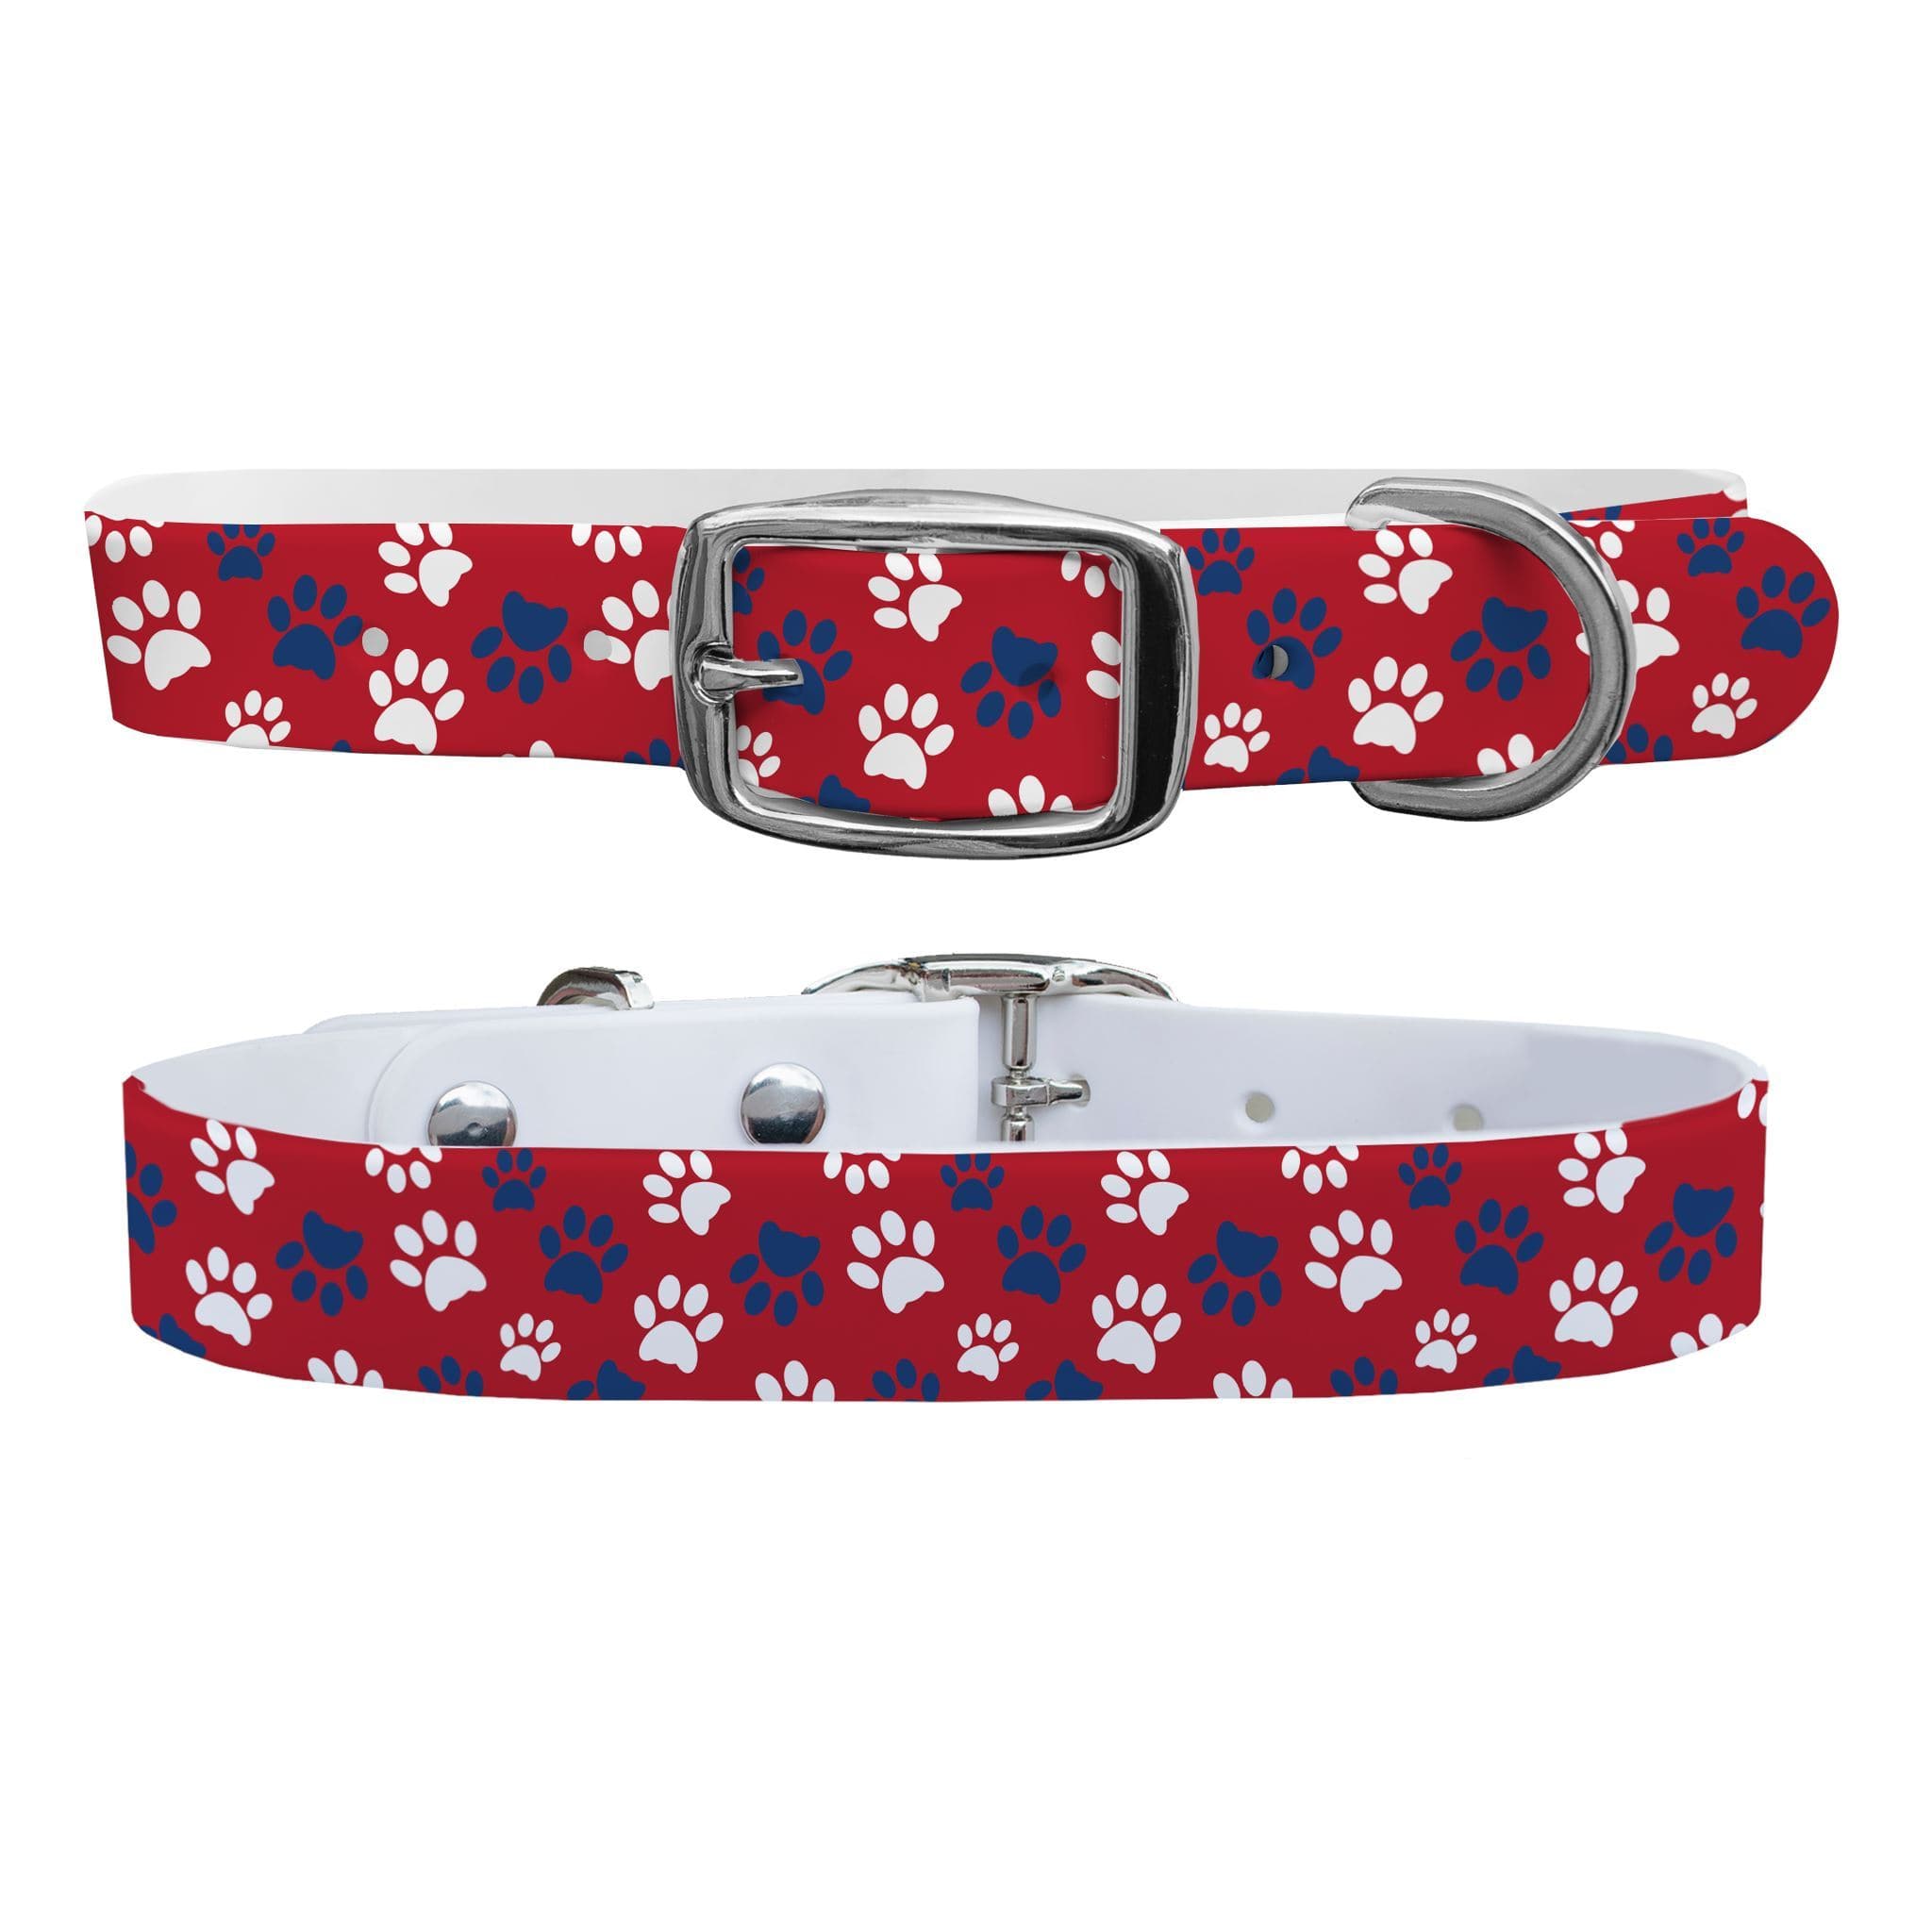 Pawtriot Red Dog Collar With Silver Buckle - Medium